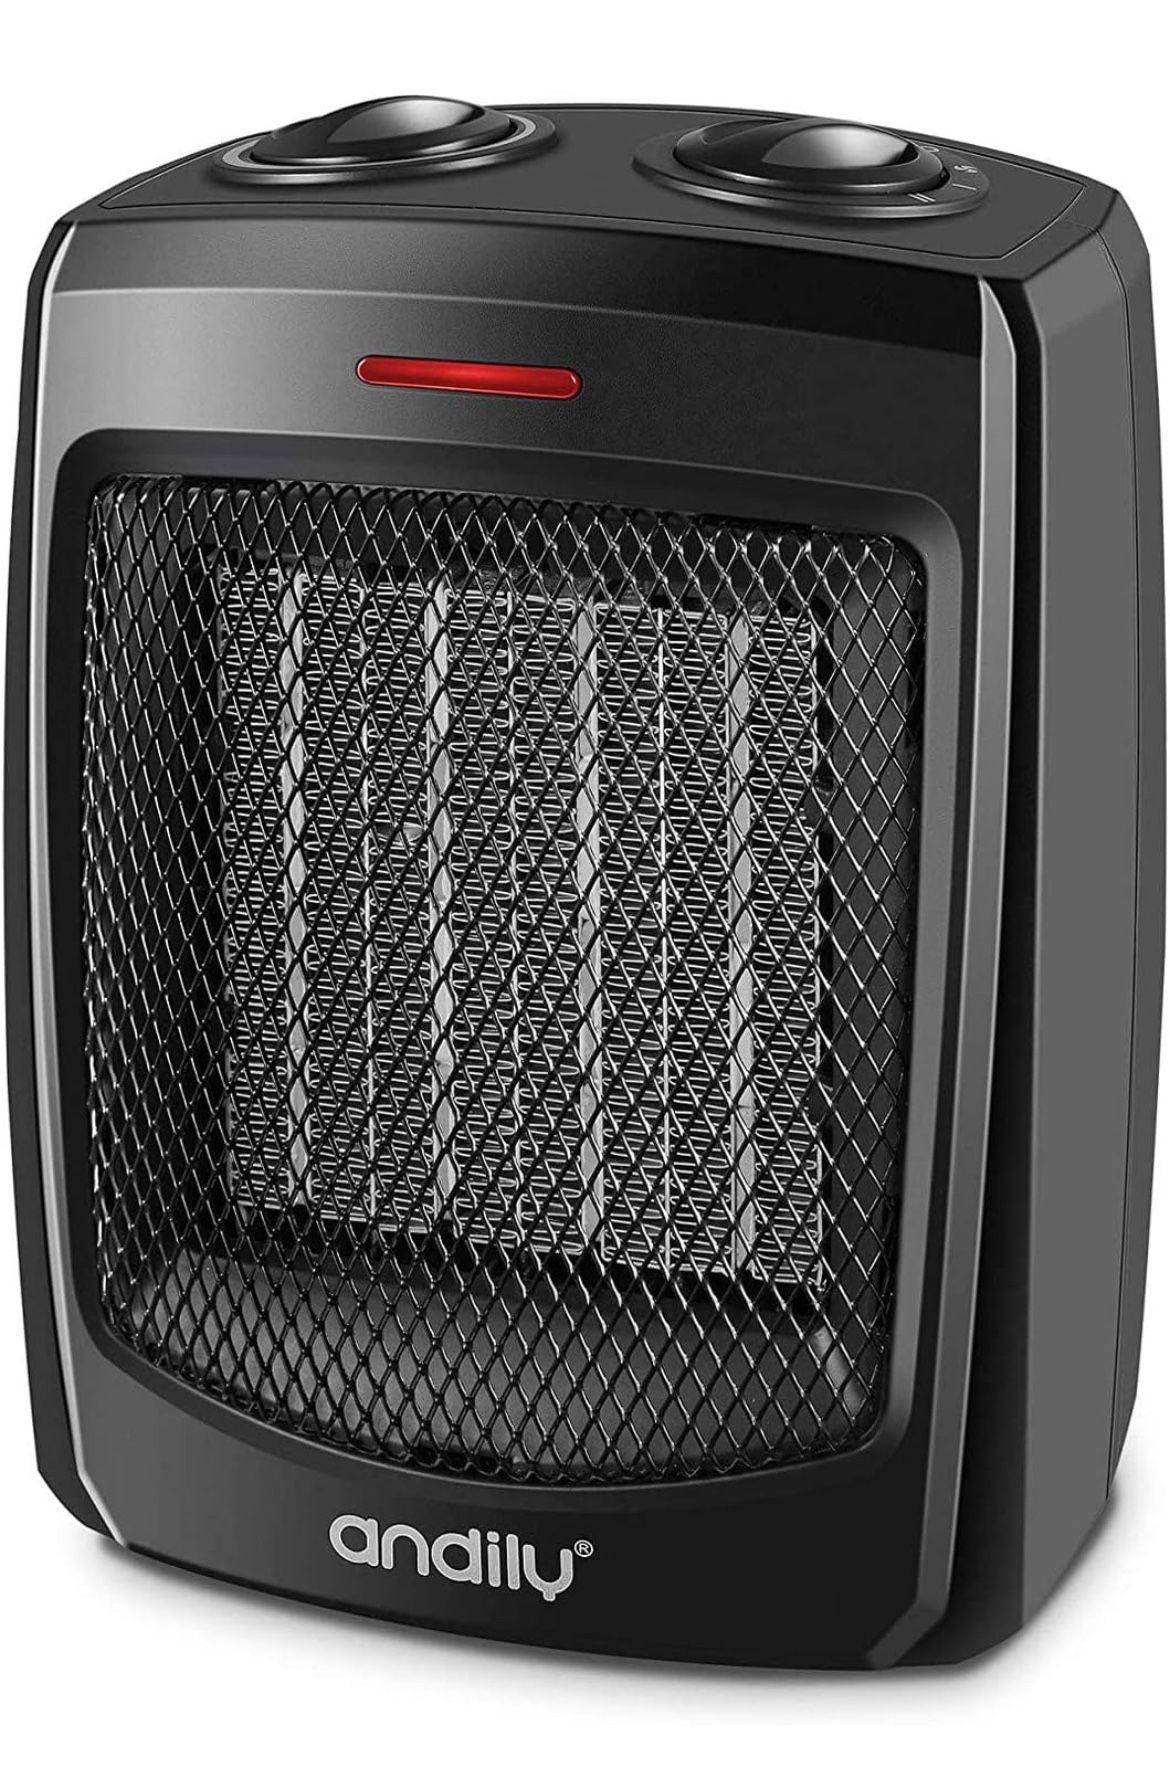 Small Space Heater 